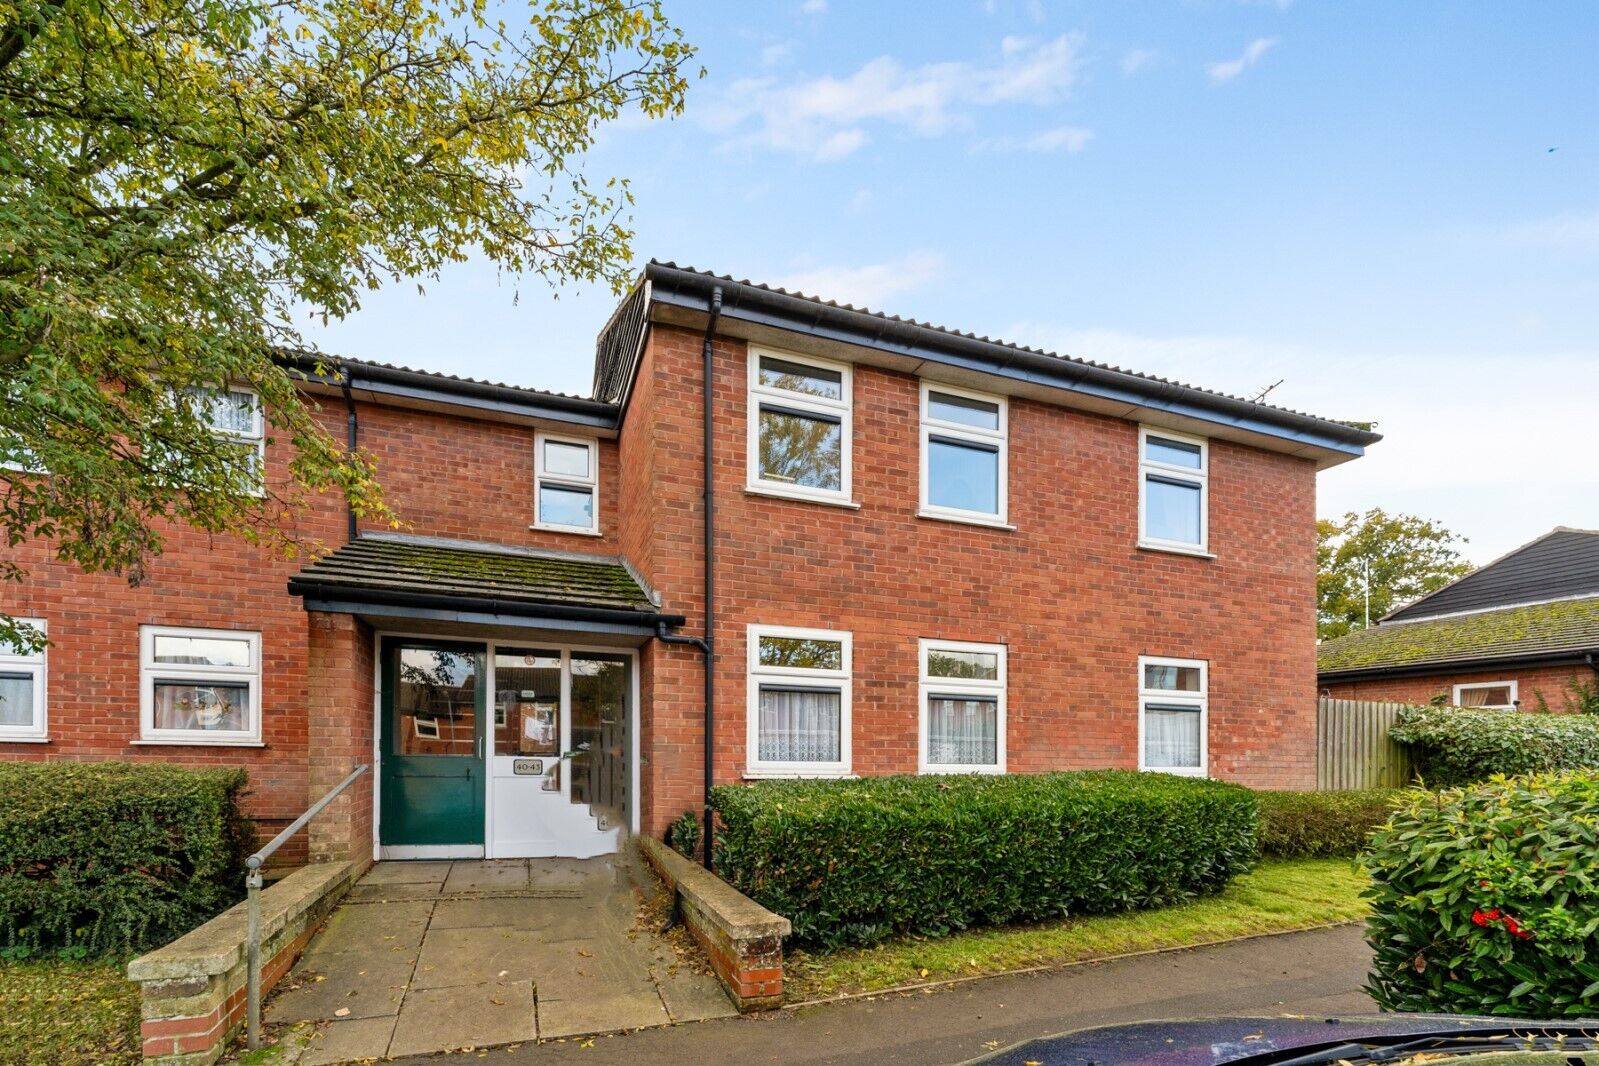 2 bedroom  flat for sale Coltsfield, Stansted, CM24, main image